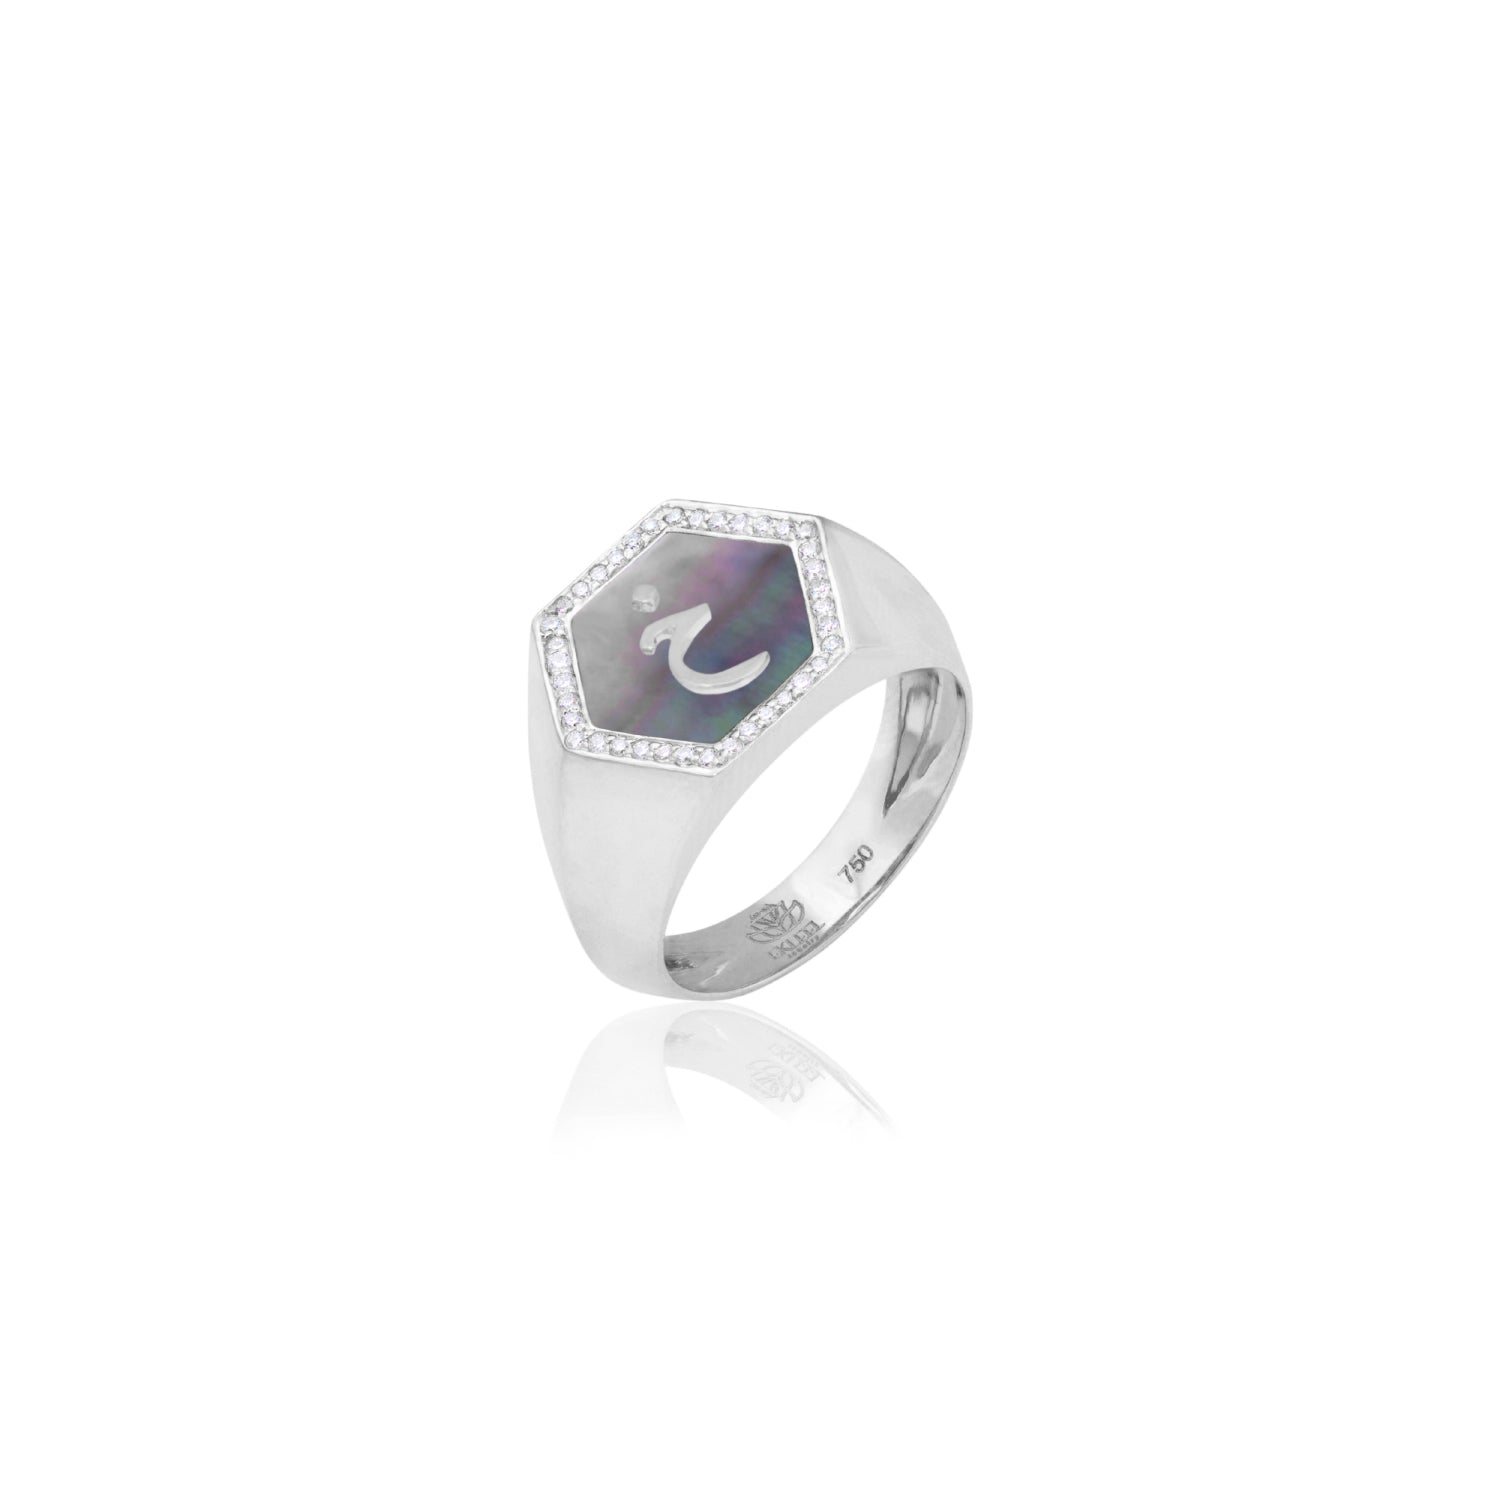 Qamoos 2.0 Letter خ Black Mother of Pearl and Diamond Signet Ring in White Gold